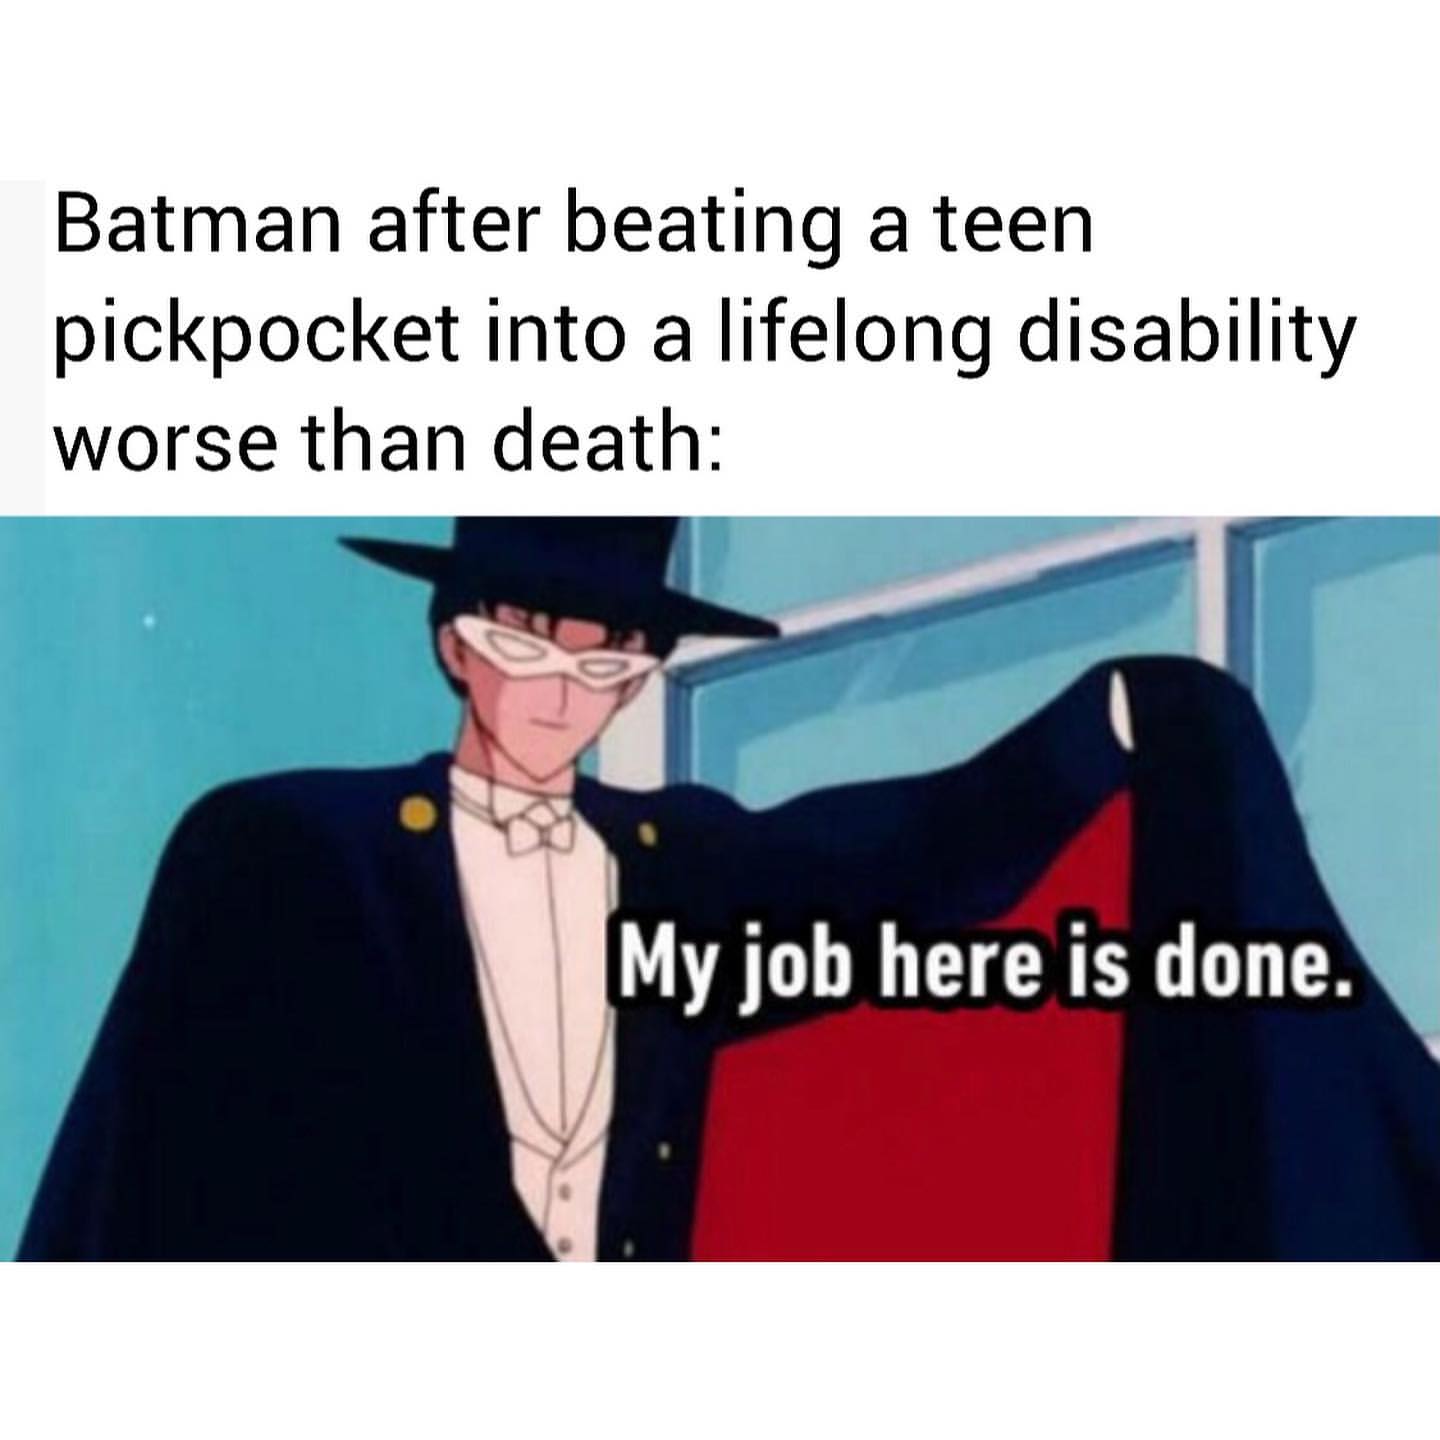 Batman after beating a teen pickpocket into a lifelong disability worse than death: My job here is done.